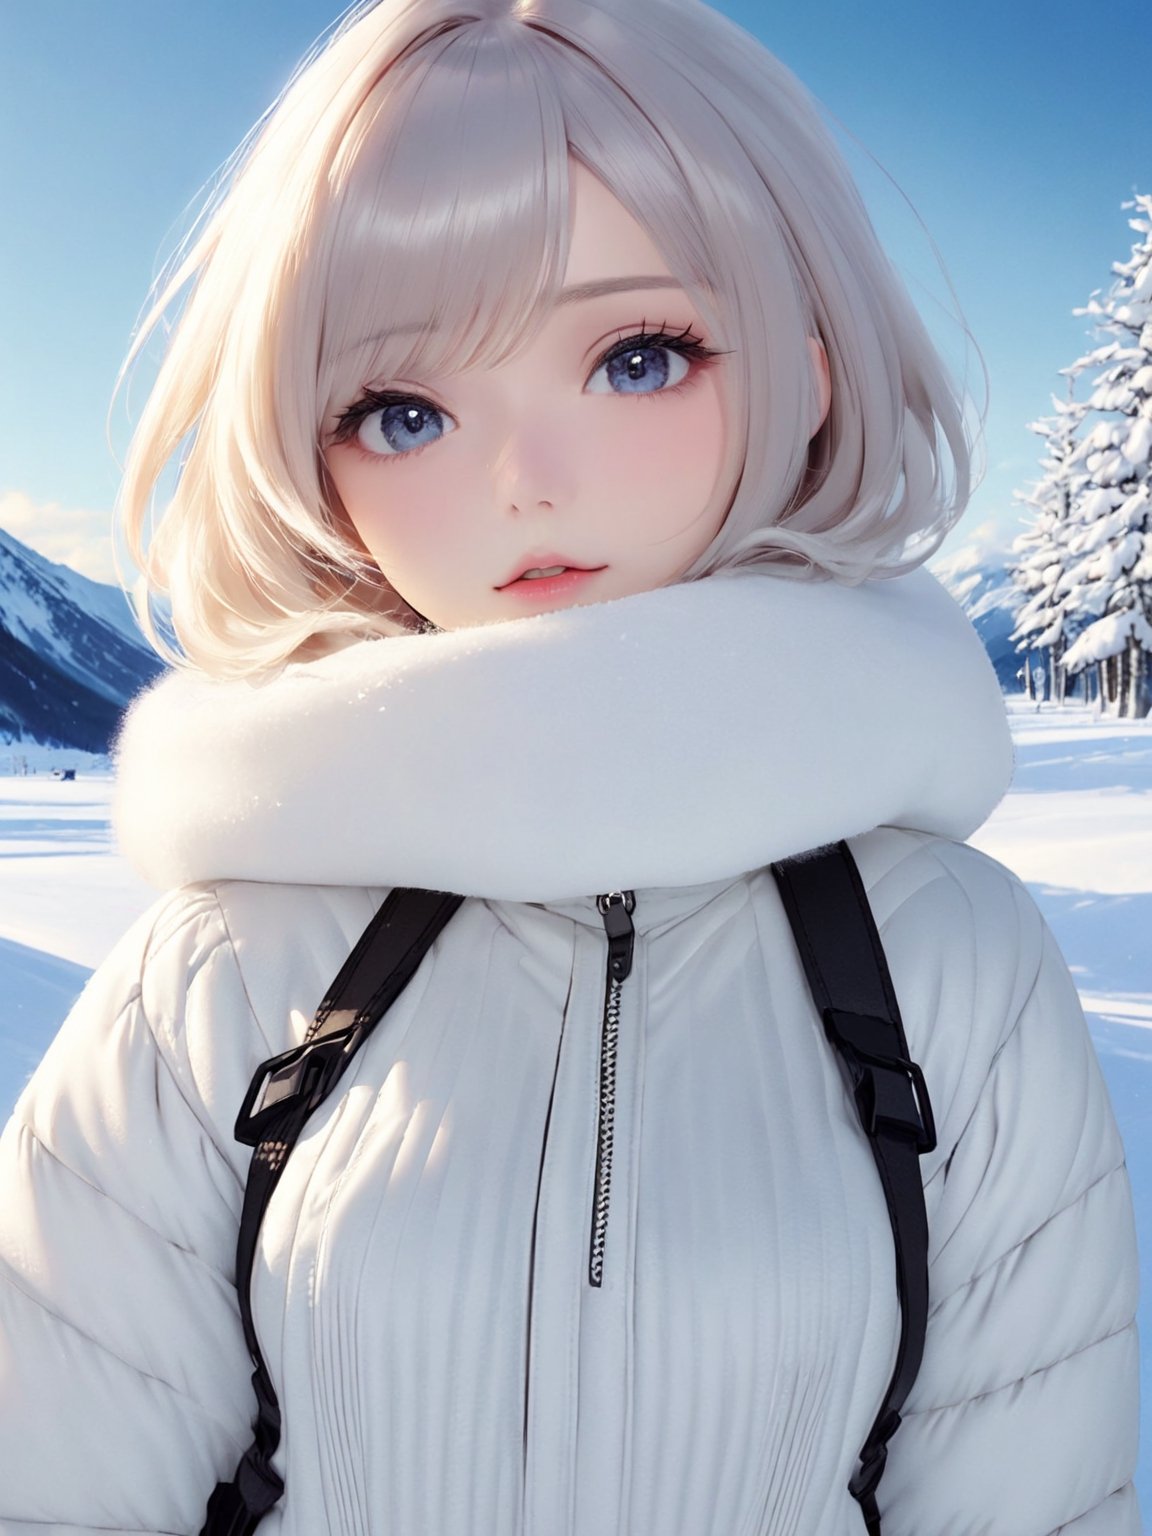 //Quality,
photo r3al, detailmaster2, masterpiece, photorealistic, 8k, 8k UHD, best quality, ultra realistic, ultra detailed, hyperdetailed photography, real photo
,//Character,
1girl, solo, looking_at_viewer, (2b_(nier))
,//Fashion,

,//Background,
winter, snow
,//Others,
Eimi